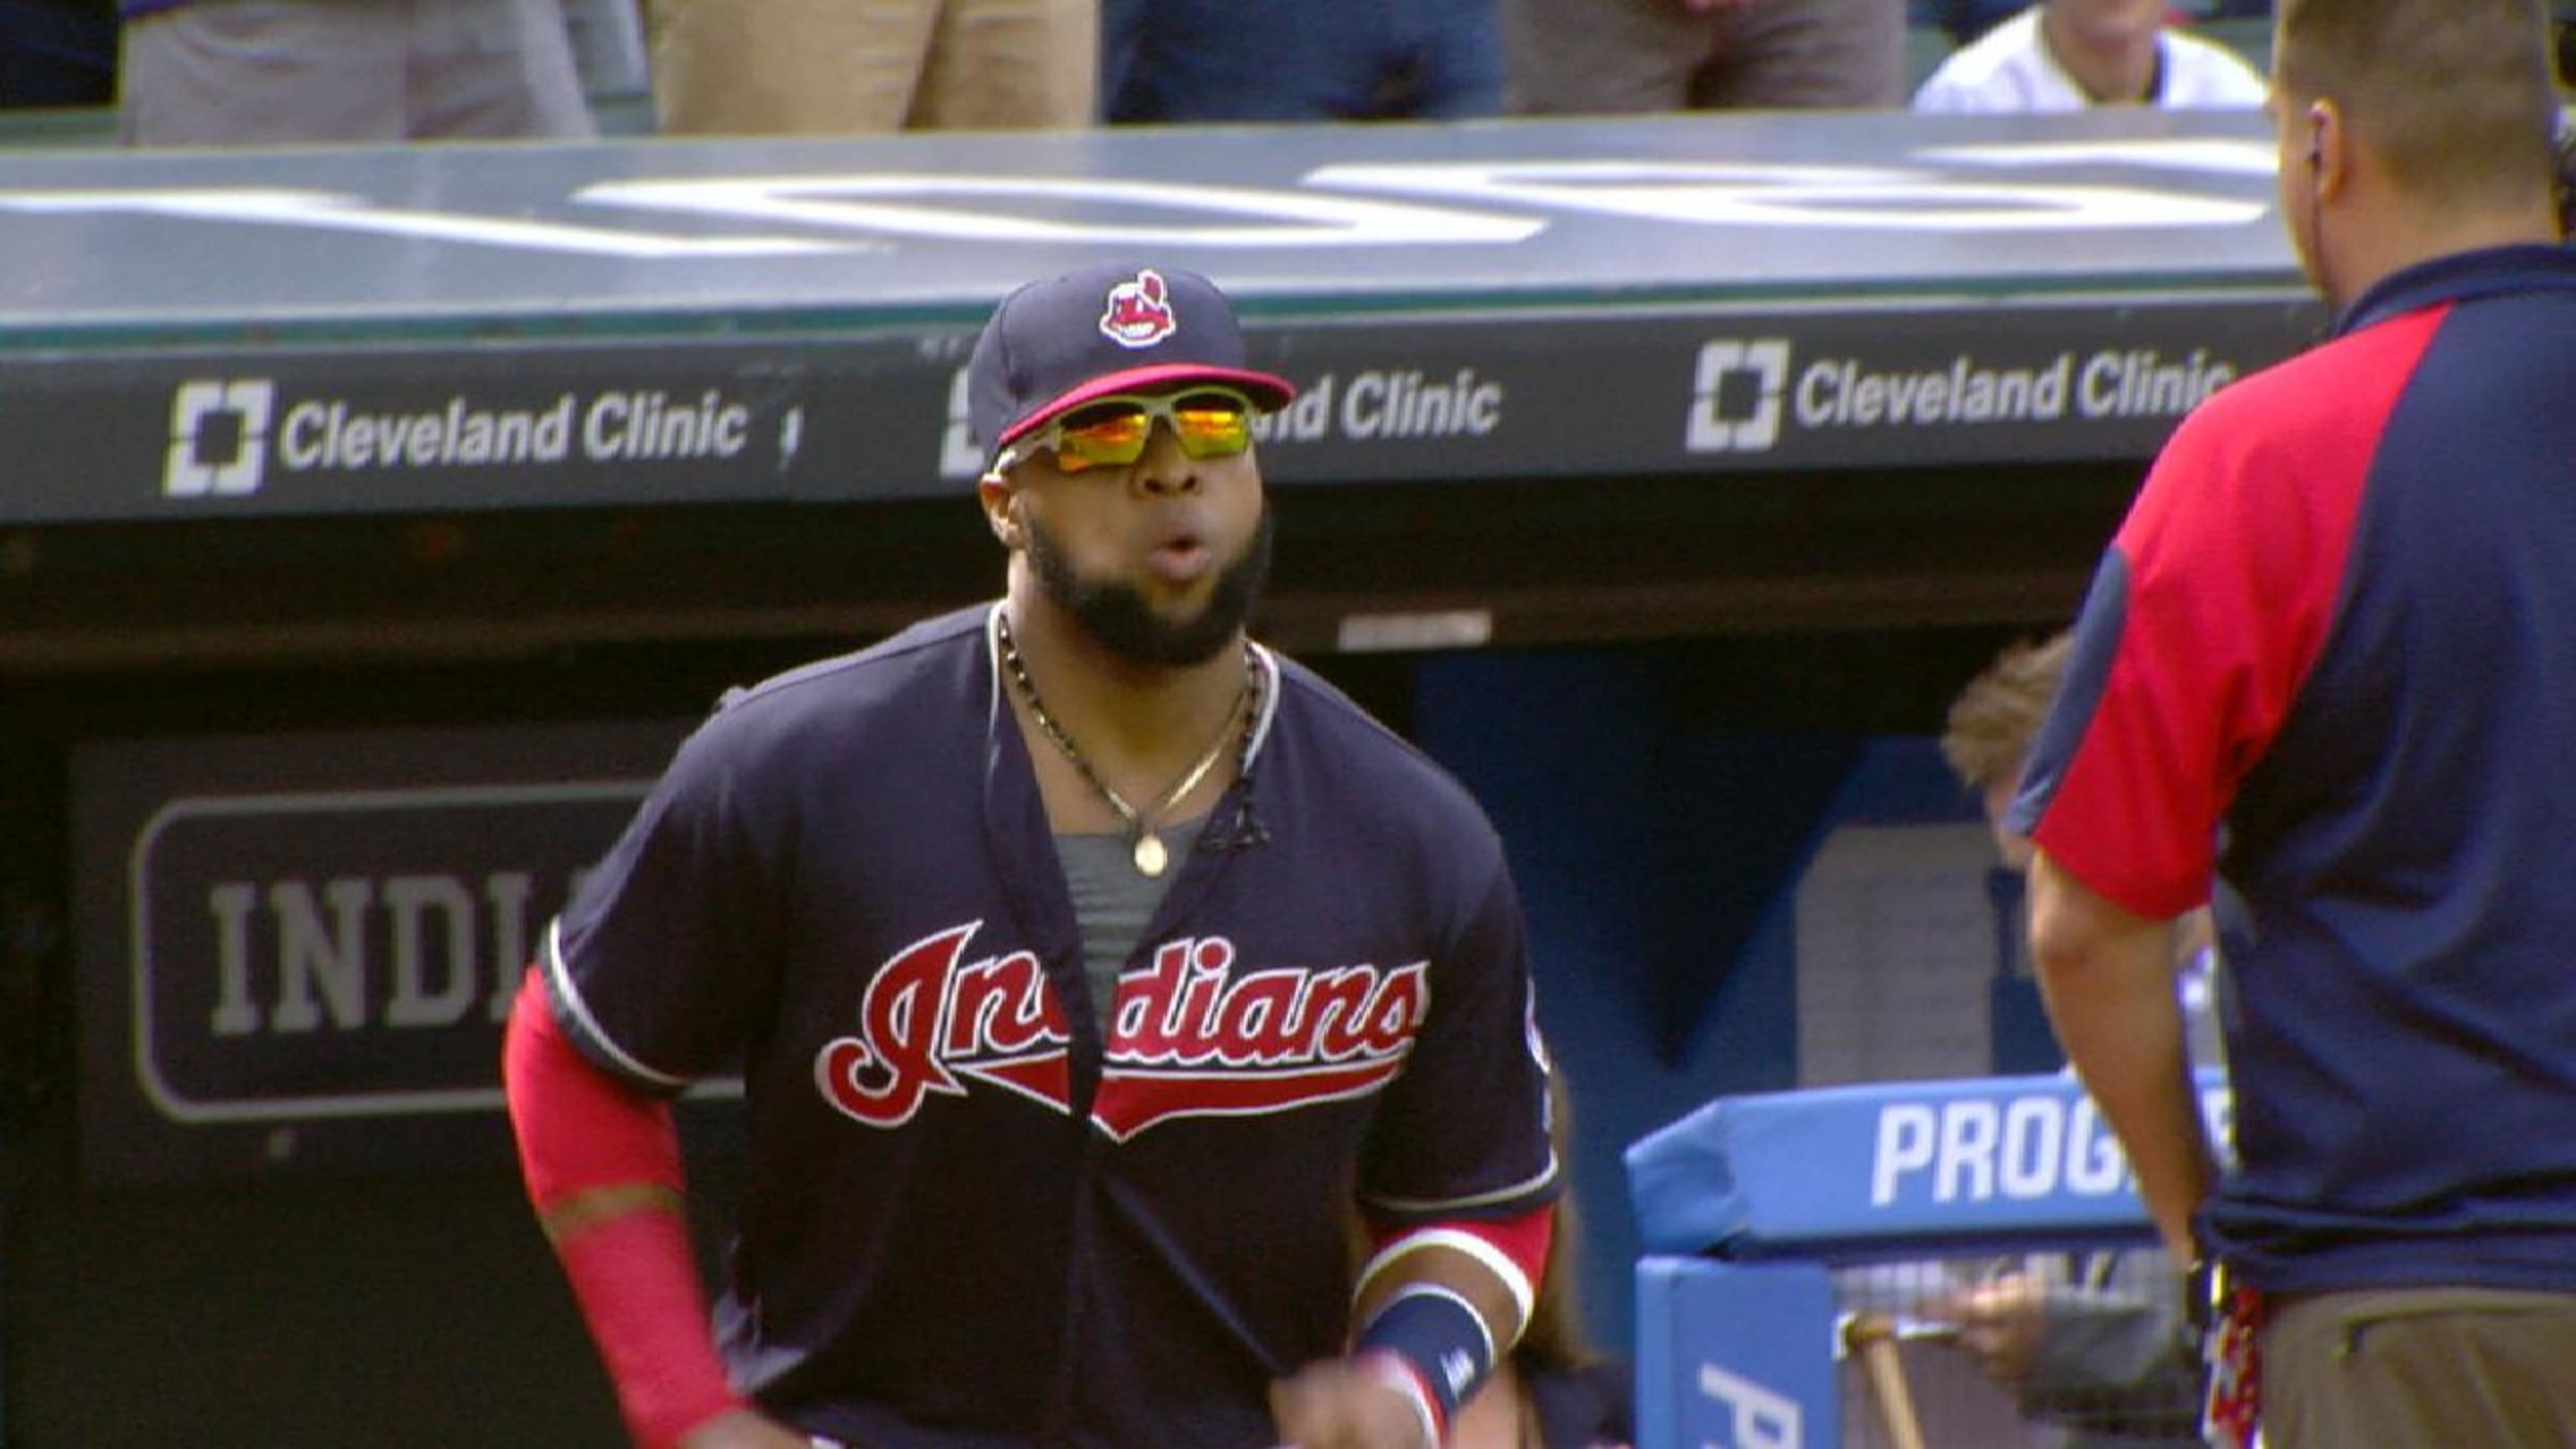 Indians' Carlos Santana wears retired, controversial logo under